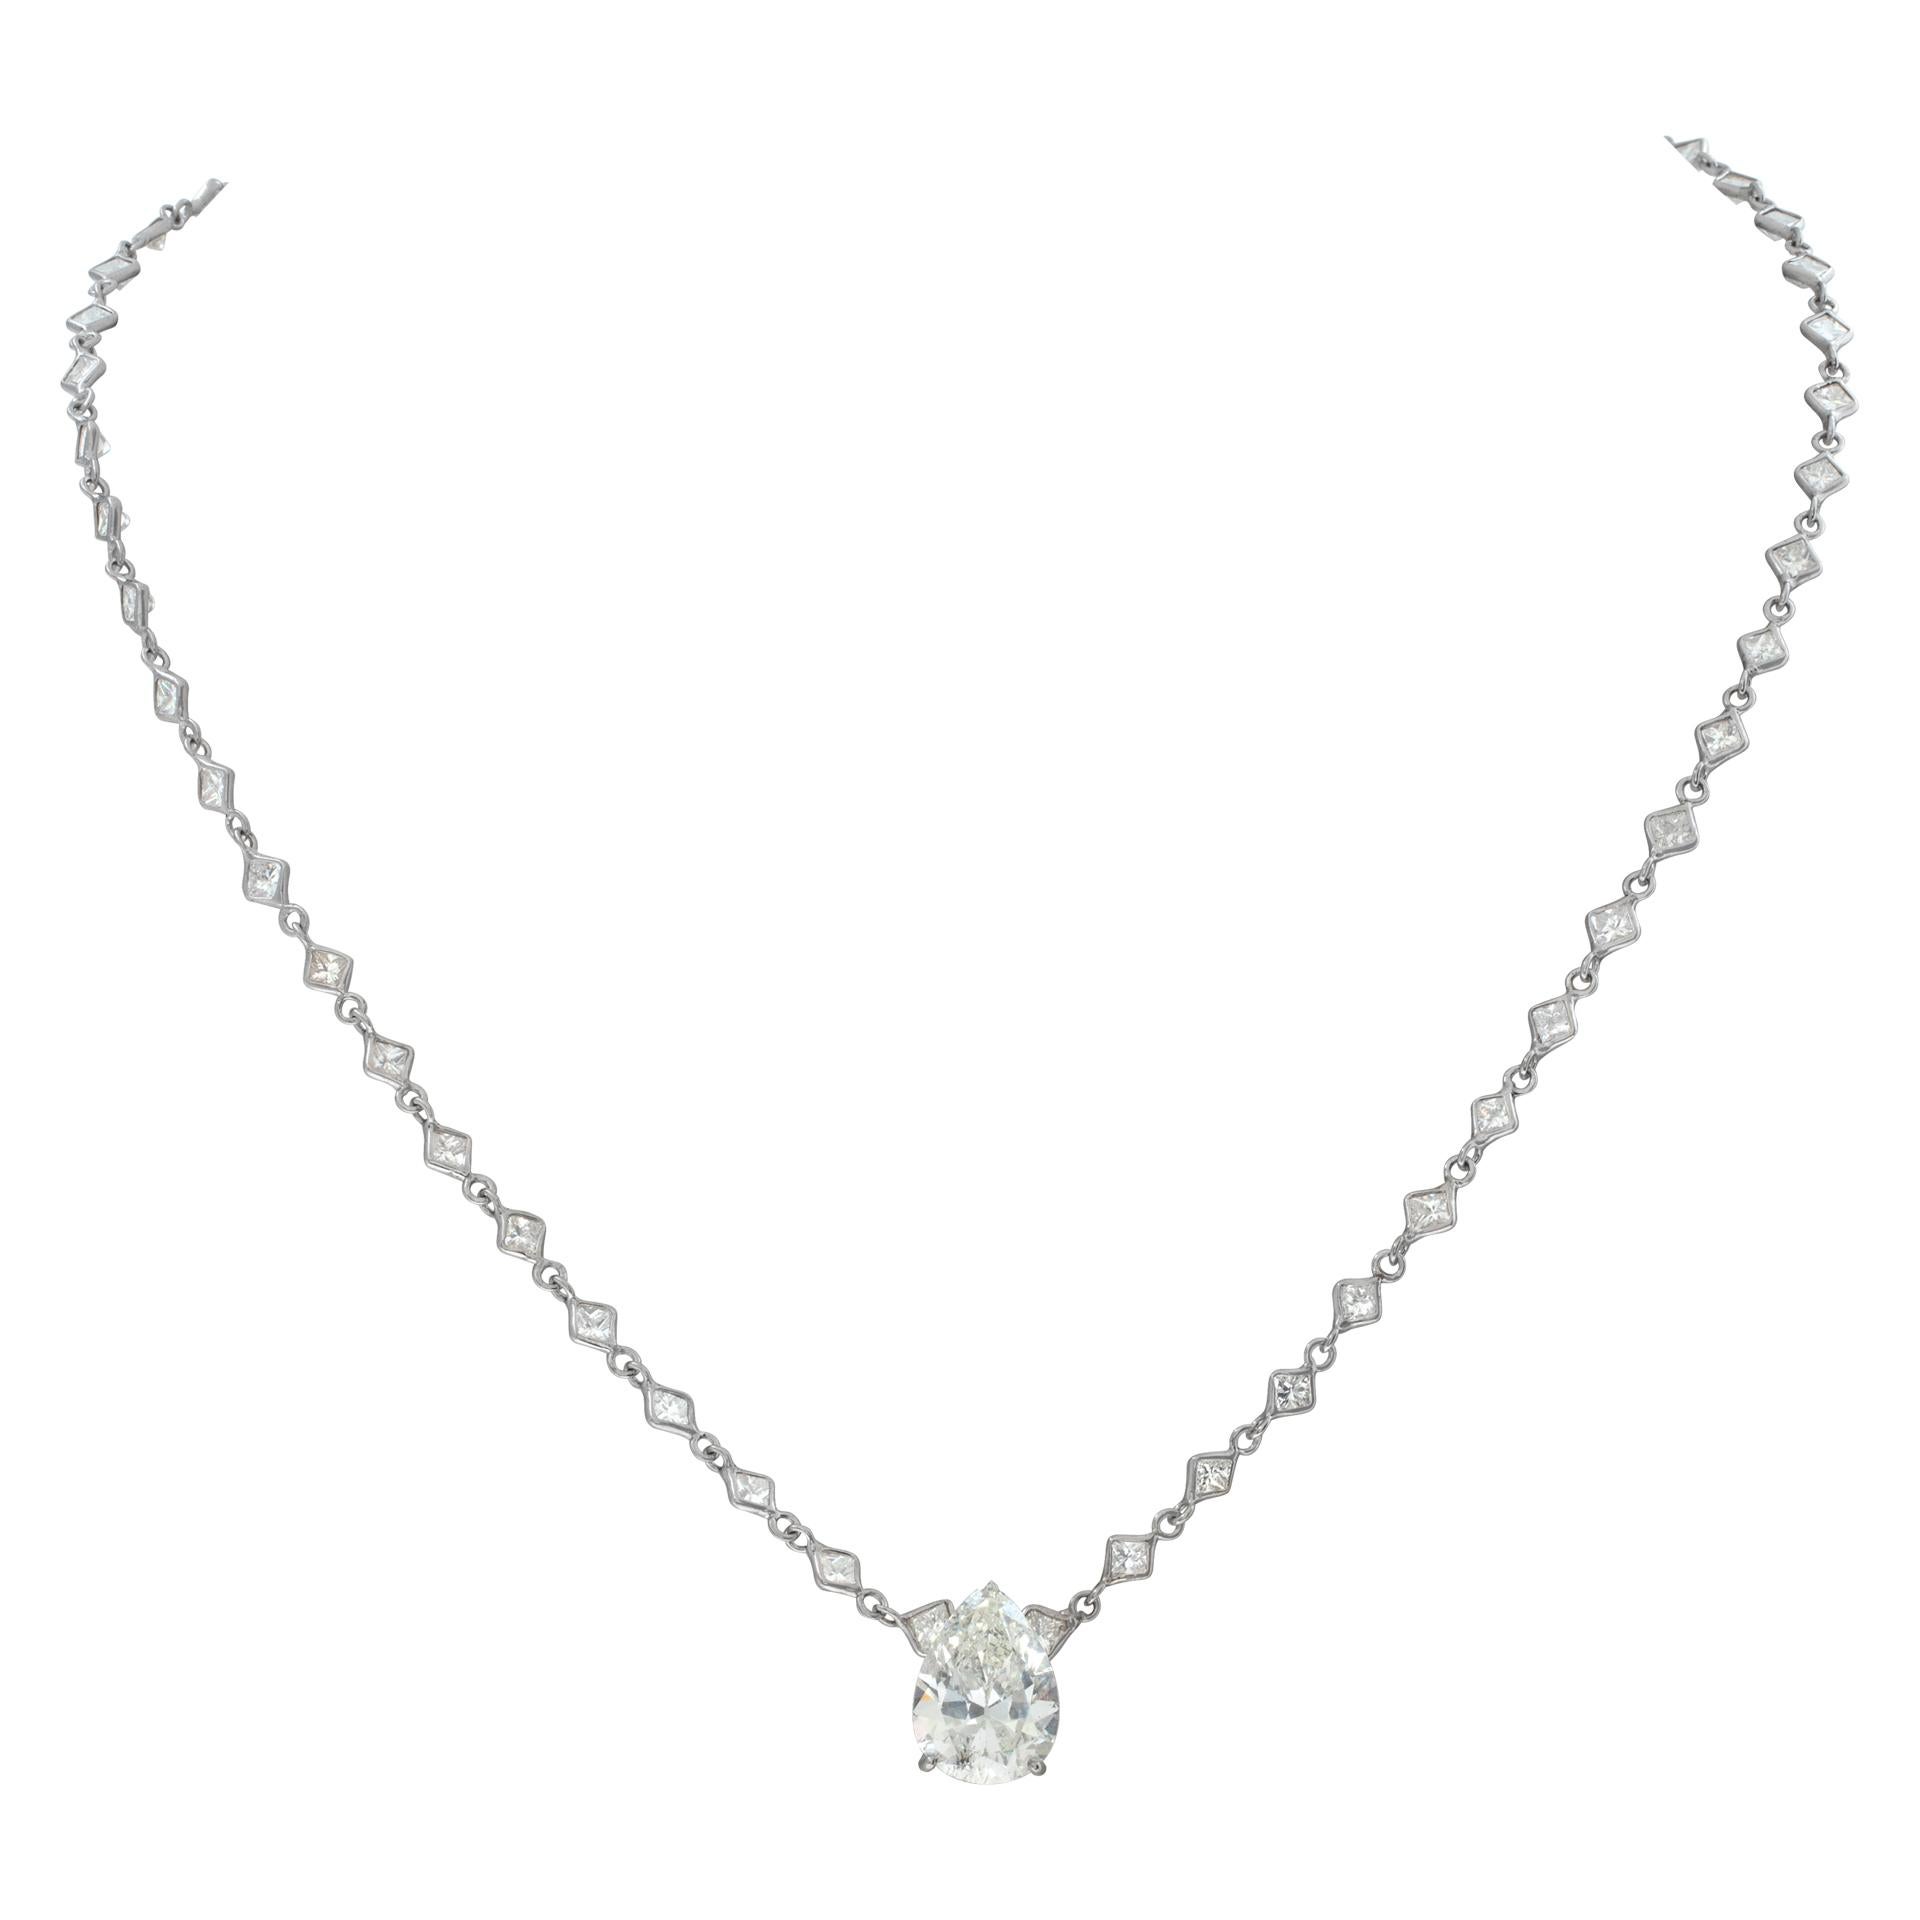 Diamond pendant necklace with GIA certified pear shaped princess cut diamonds For Sale